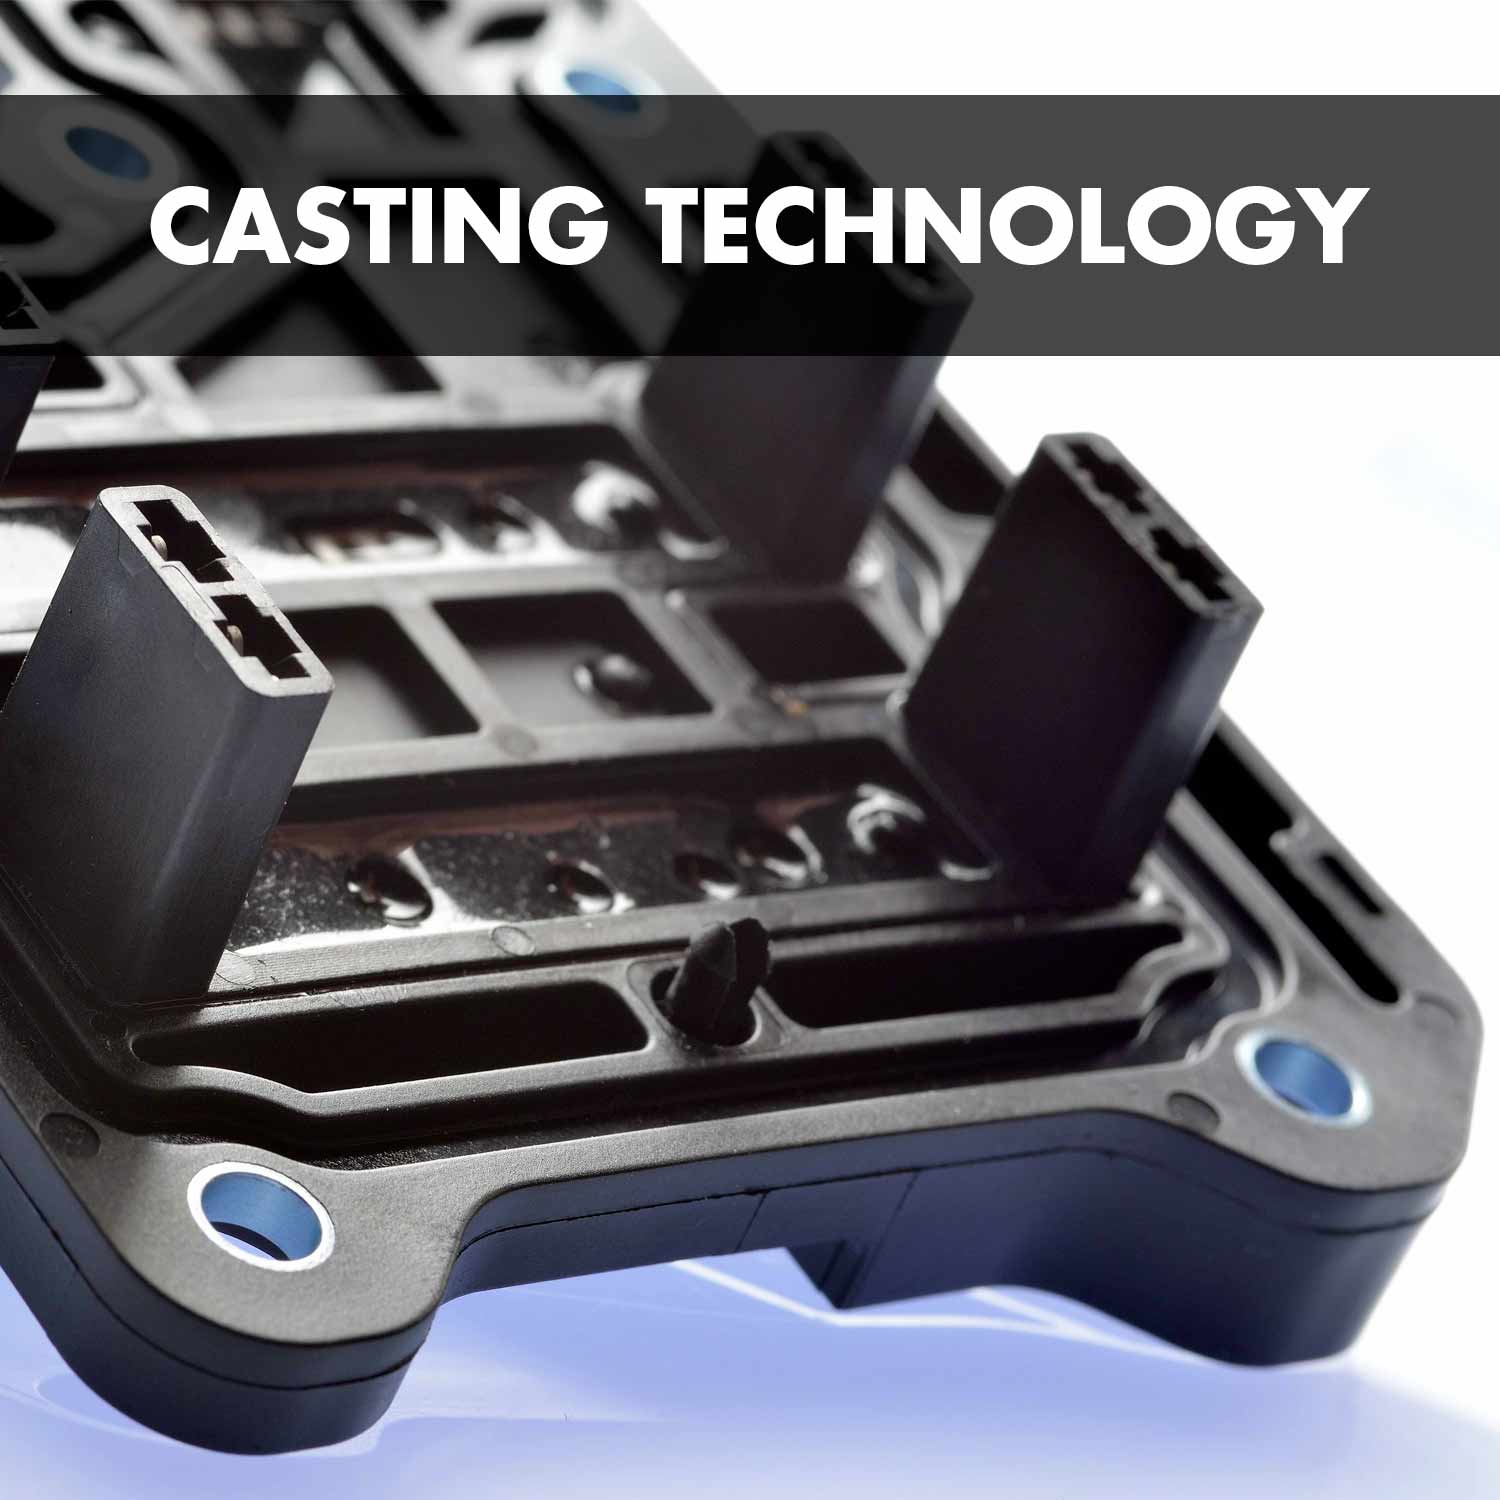 Casting technology: Precisely targeted dosing of high-quality branded casting compounds directly onto the component.